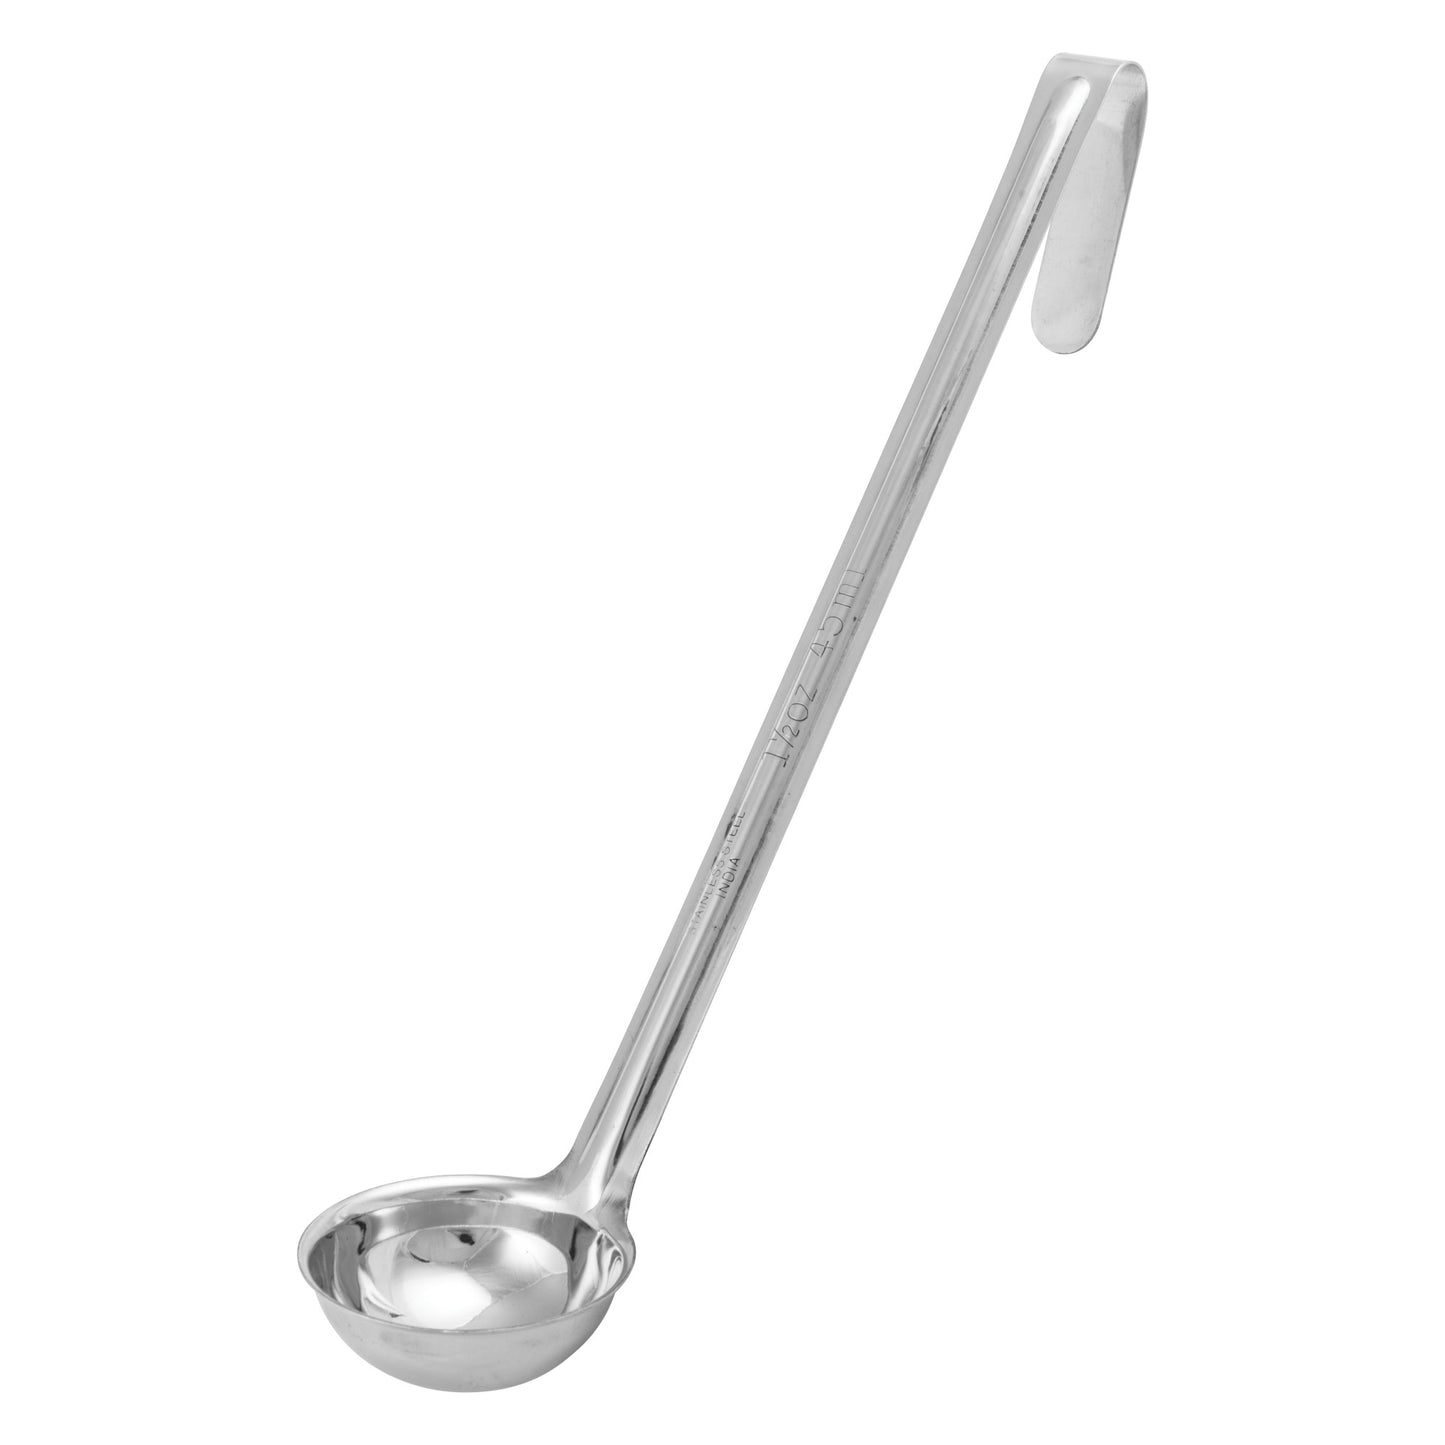 LDIN-1.5 - Winco Prime One-Piece Ladle, Stainless Steel - 1-1/2 oz